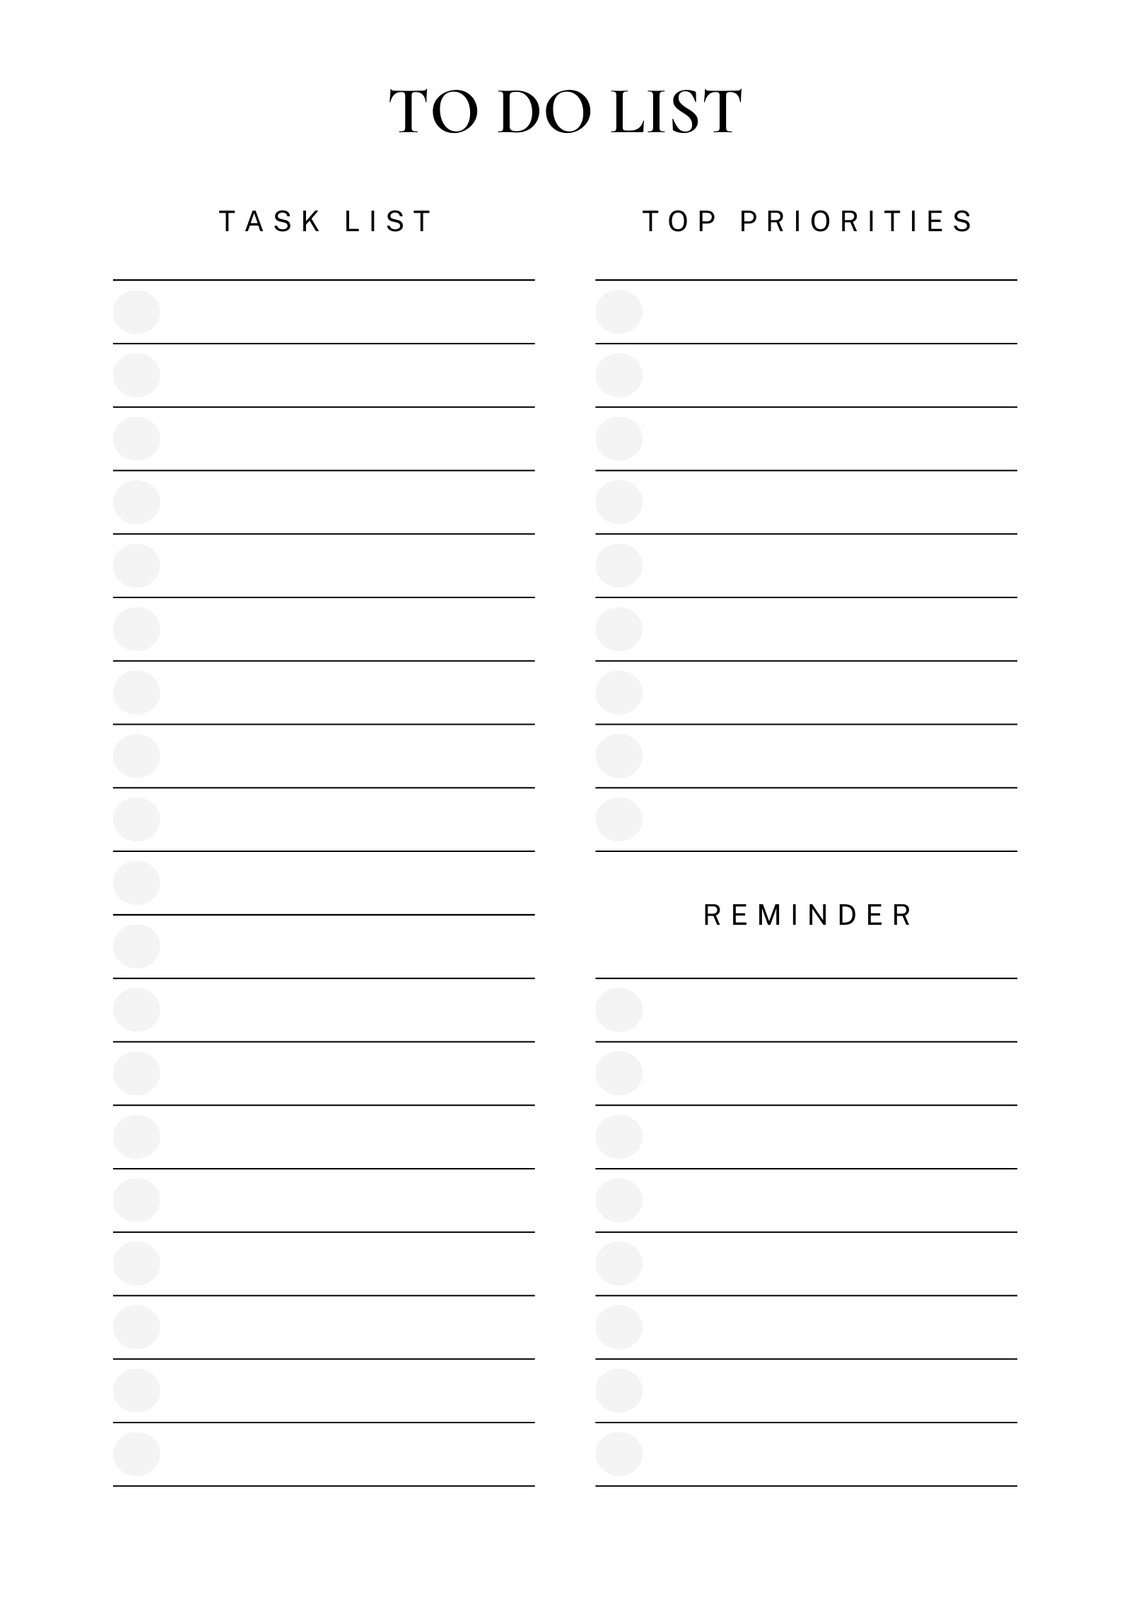 Canva Minimal And Simple To Do List Planner 8gDAaXoD7eo 